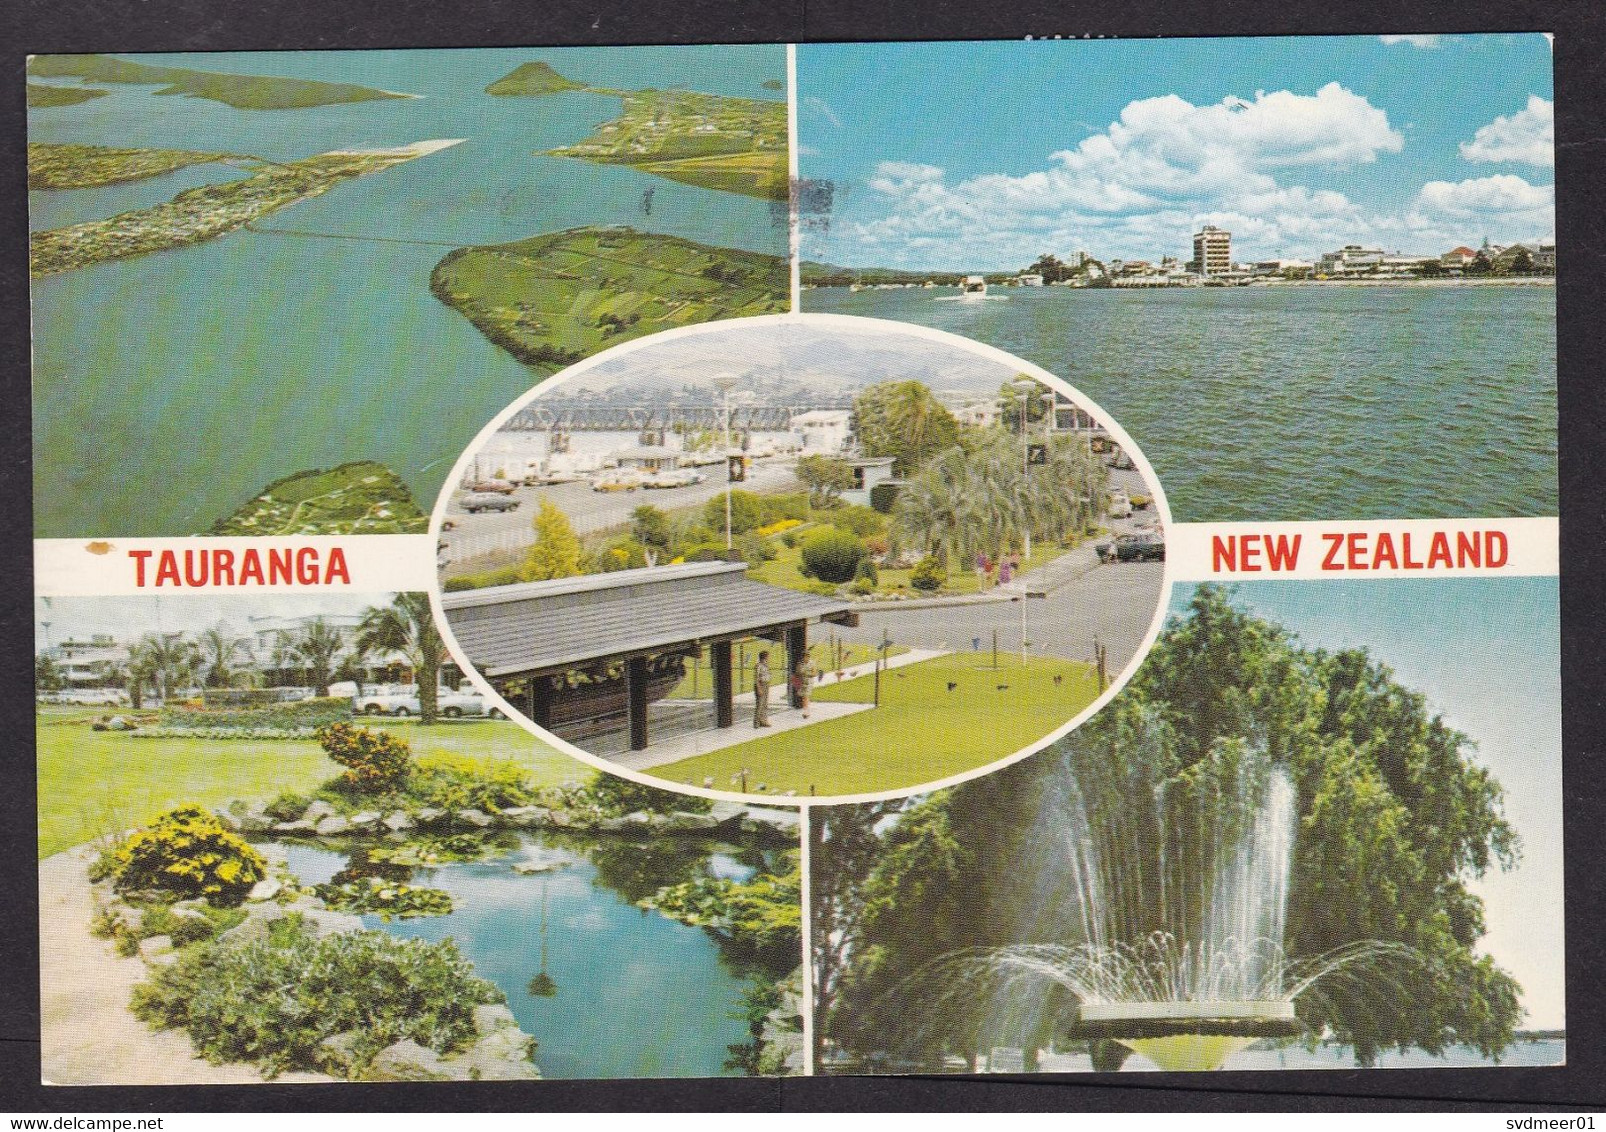 New Zealand: Airmail Picture Postcard To Netherlands, 1983, 4 Stamps, Agate, Card: Tauranga (2 Stamps Damaged) - Briefe U. Dokumente